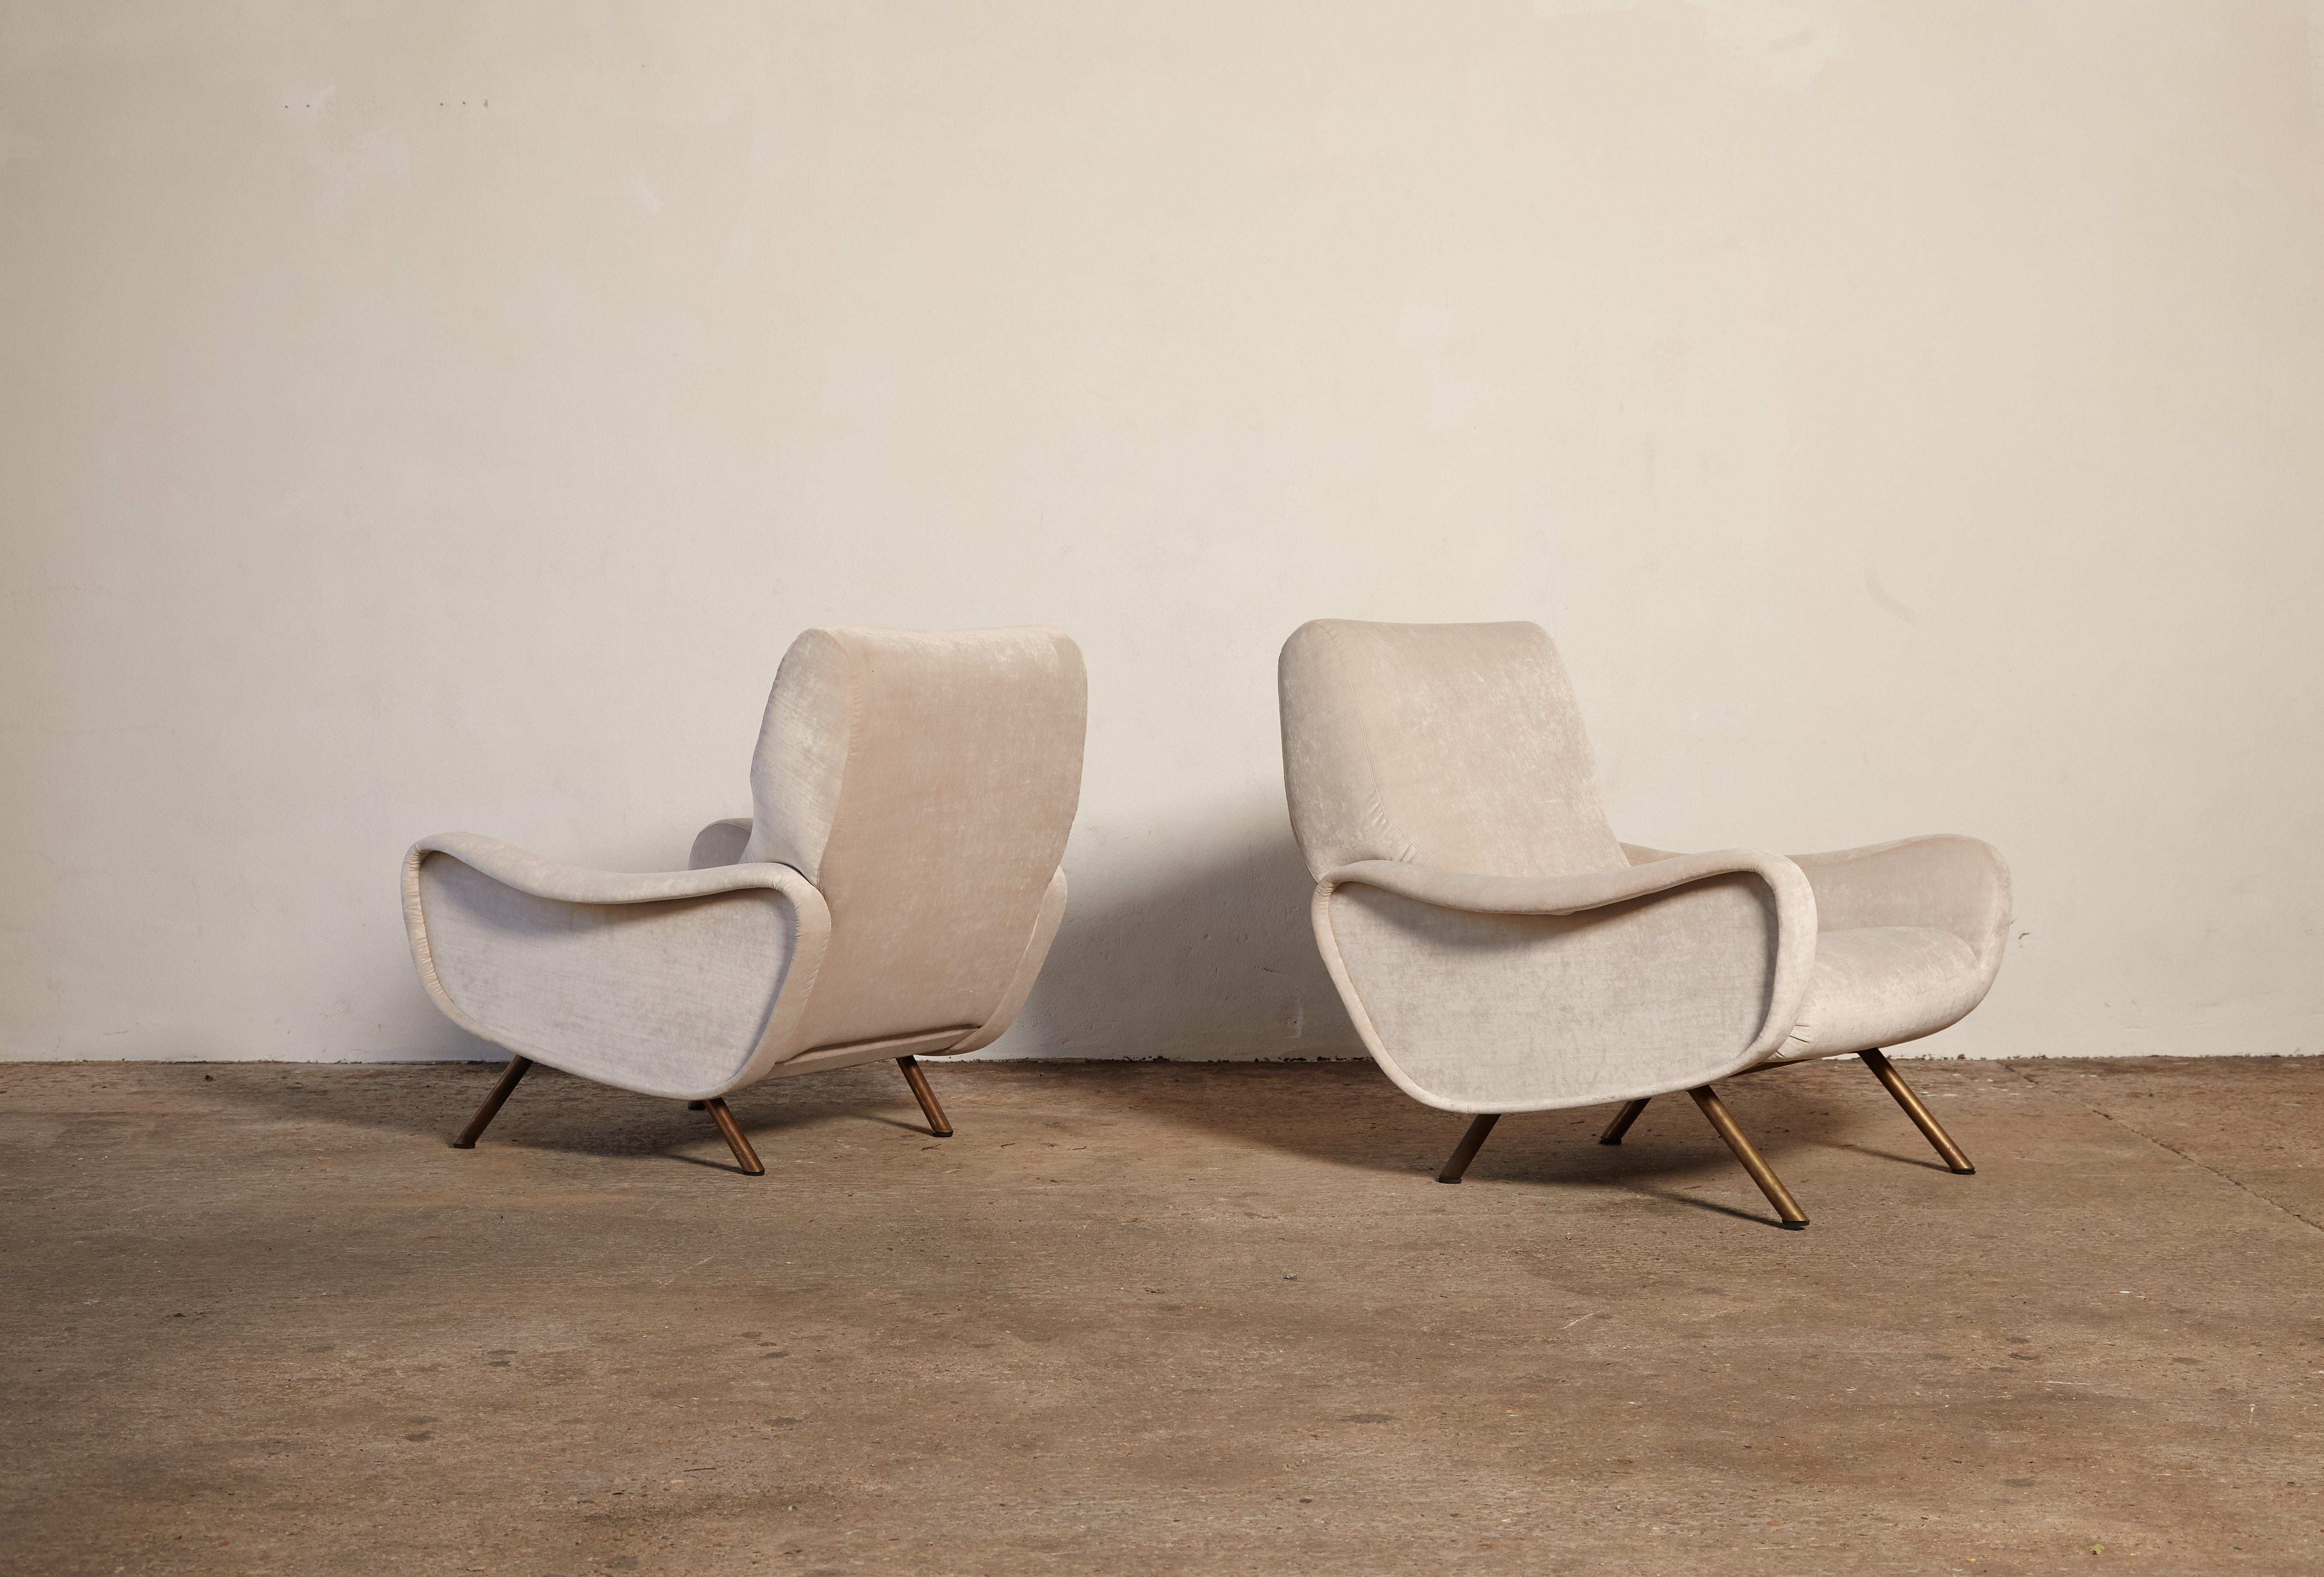 A pair of lady chairs, designed by Marco Zanuso, Italy. Upholstered in an off white cotton velvet.